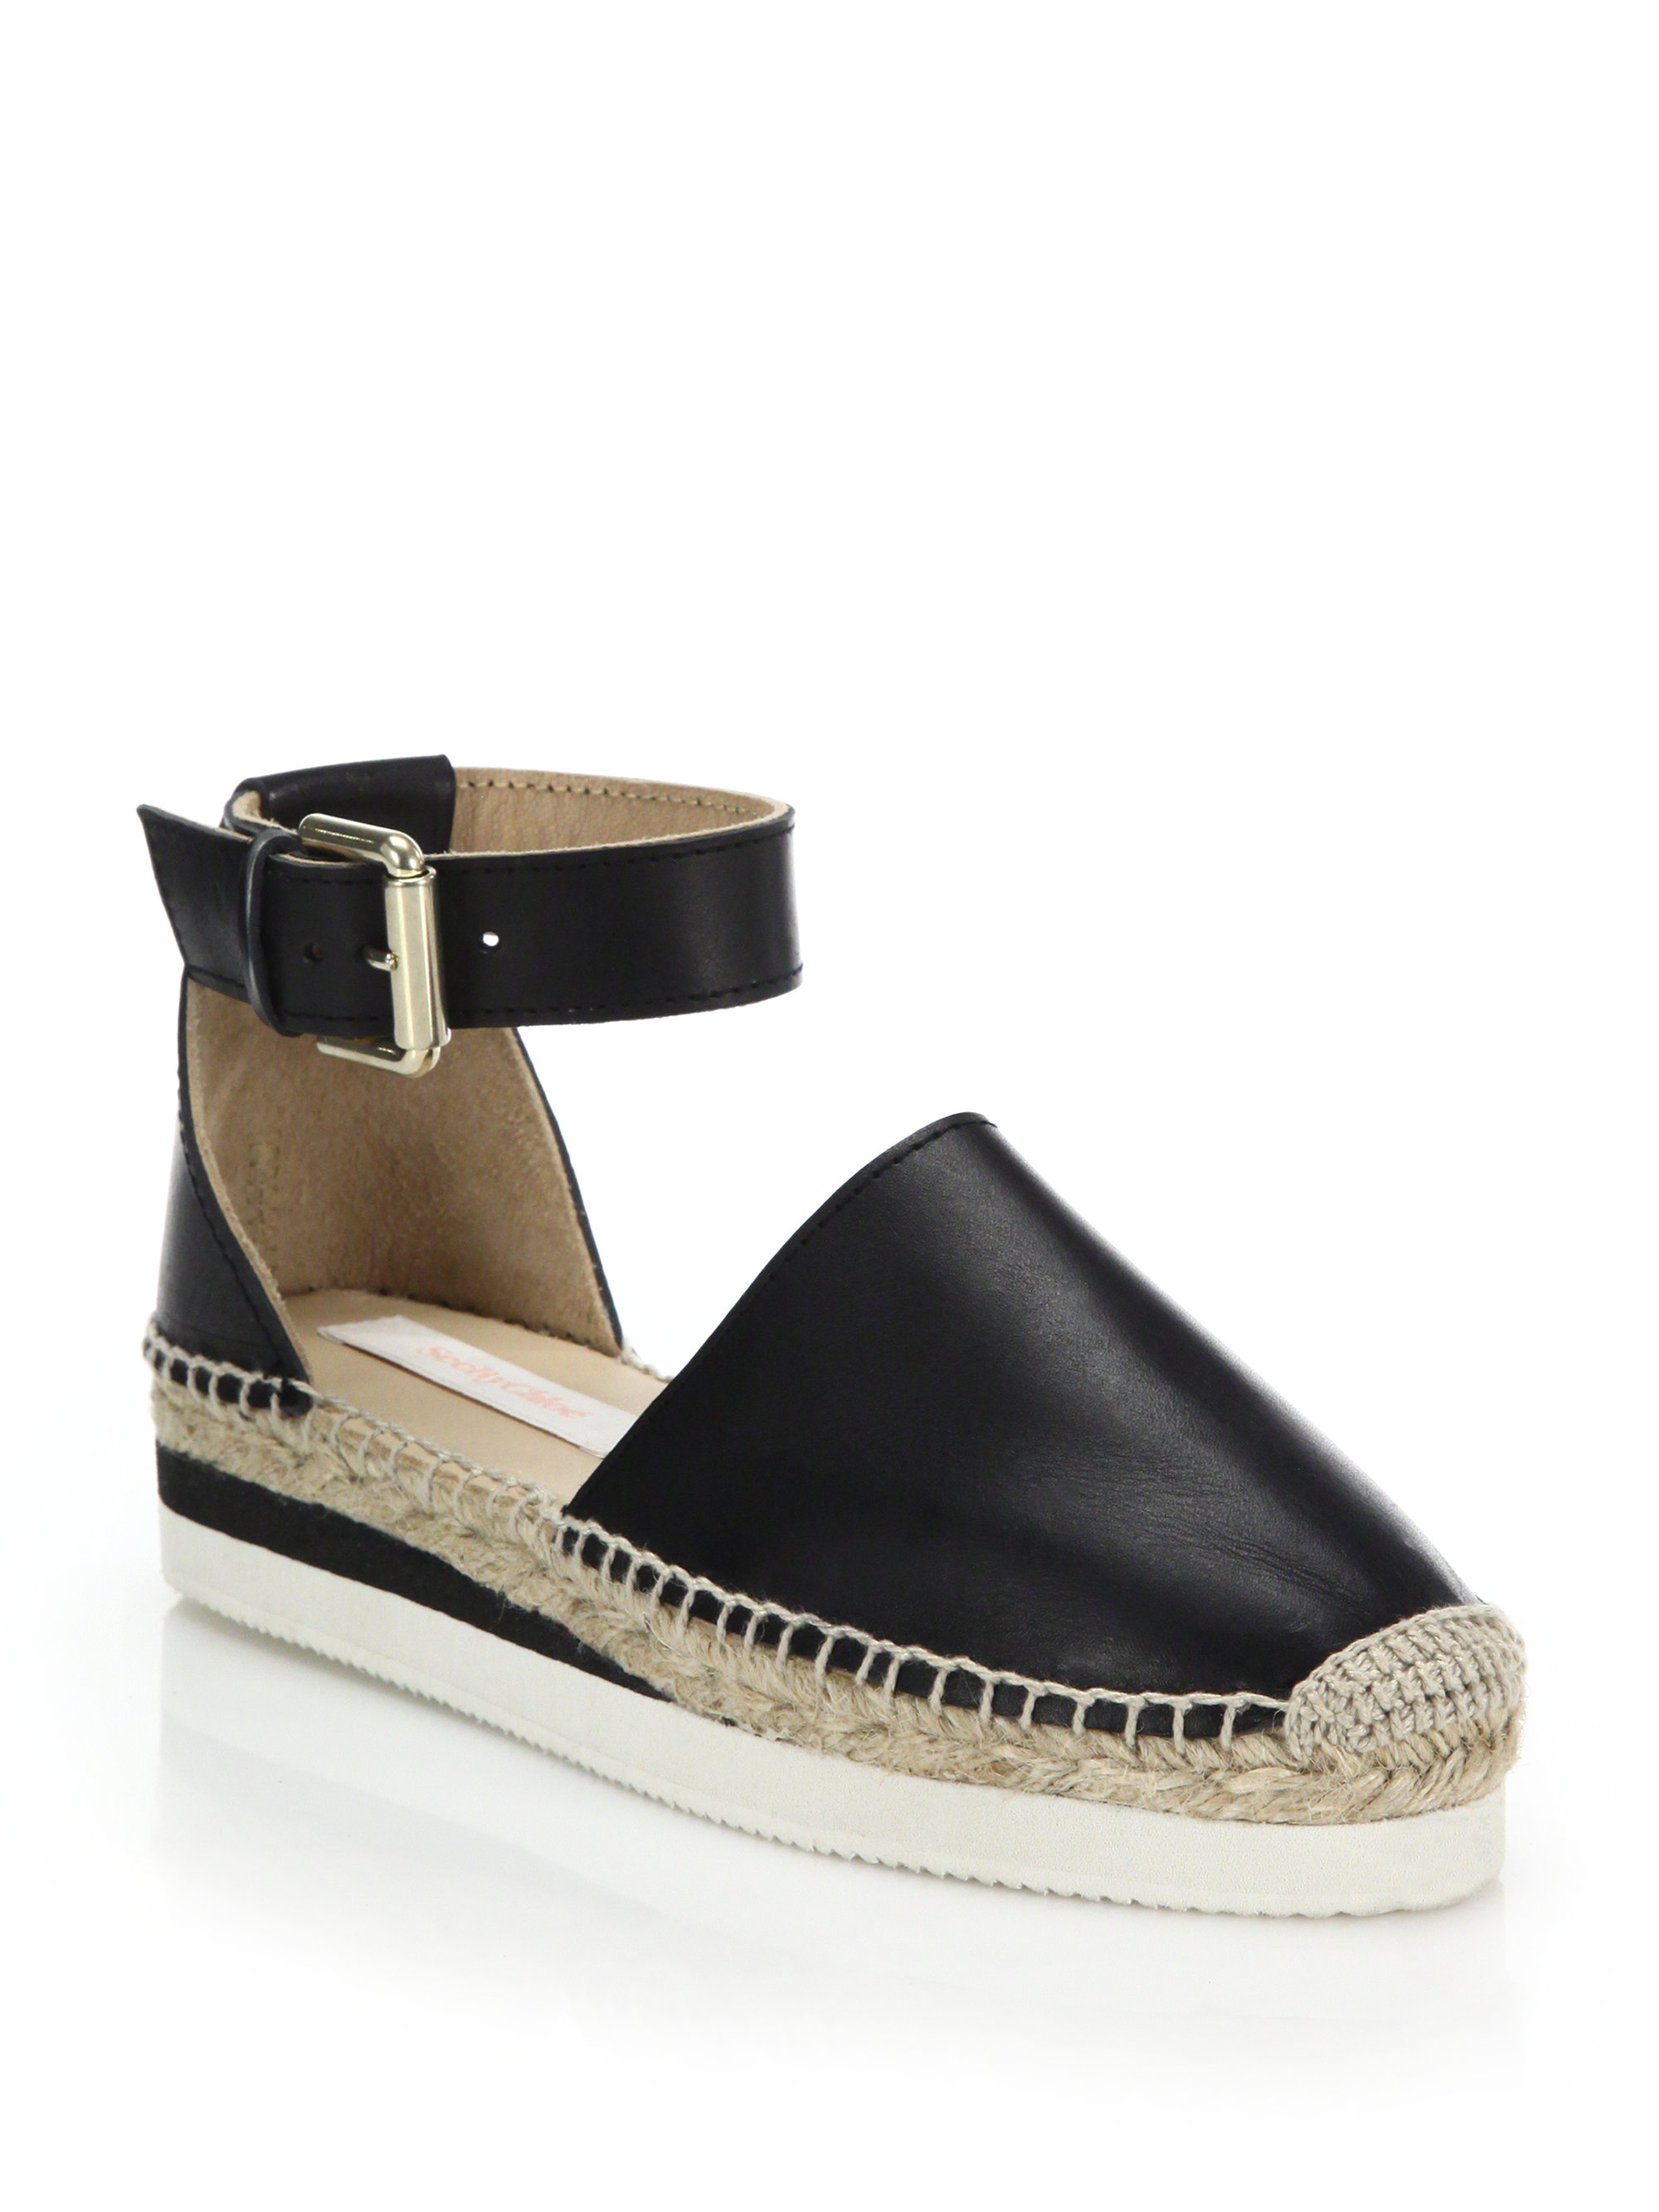 See by chloé Glyn Leather Espadrille Sandals in Black | Lyst